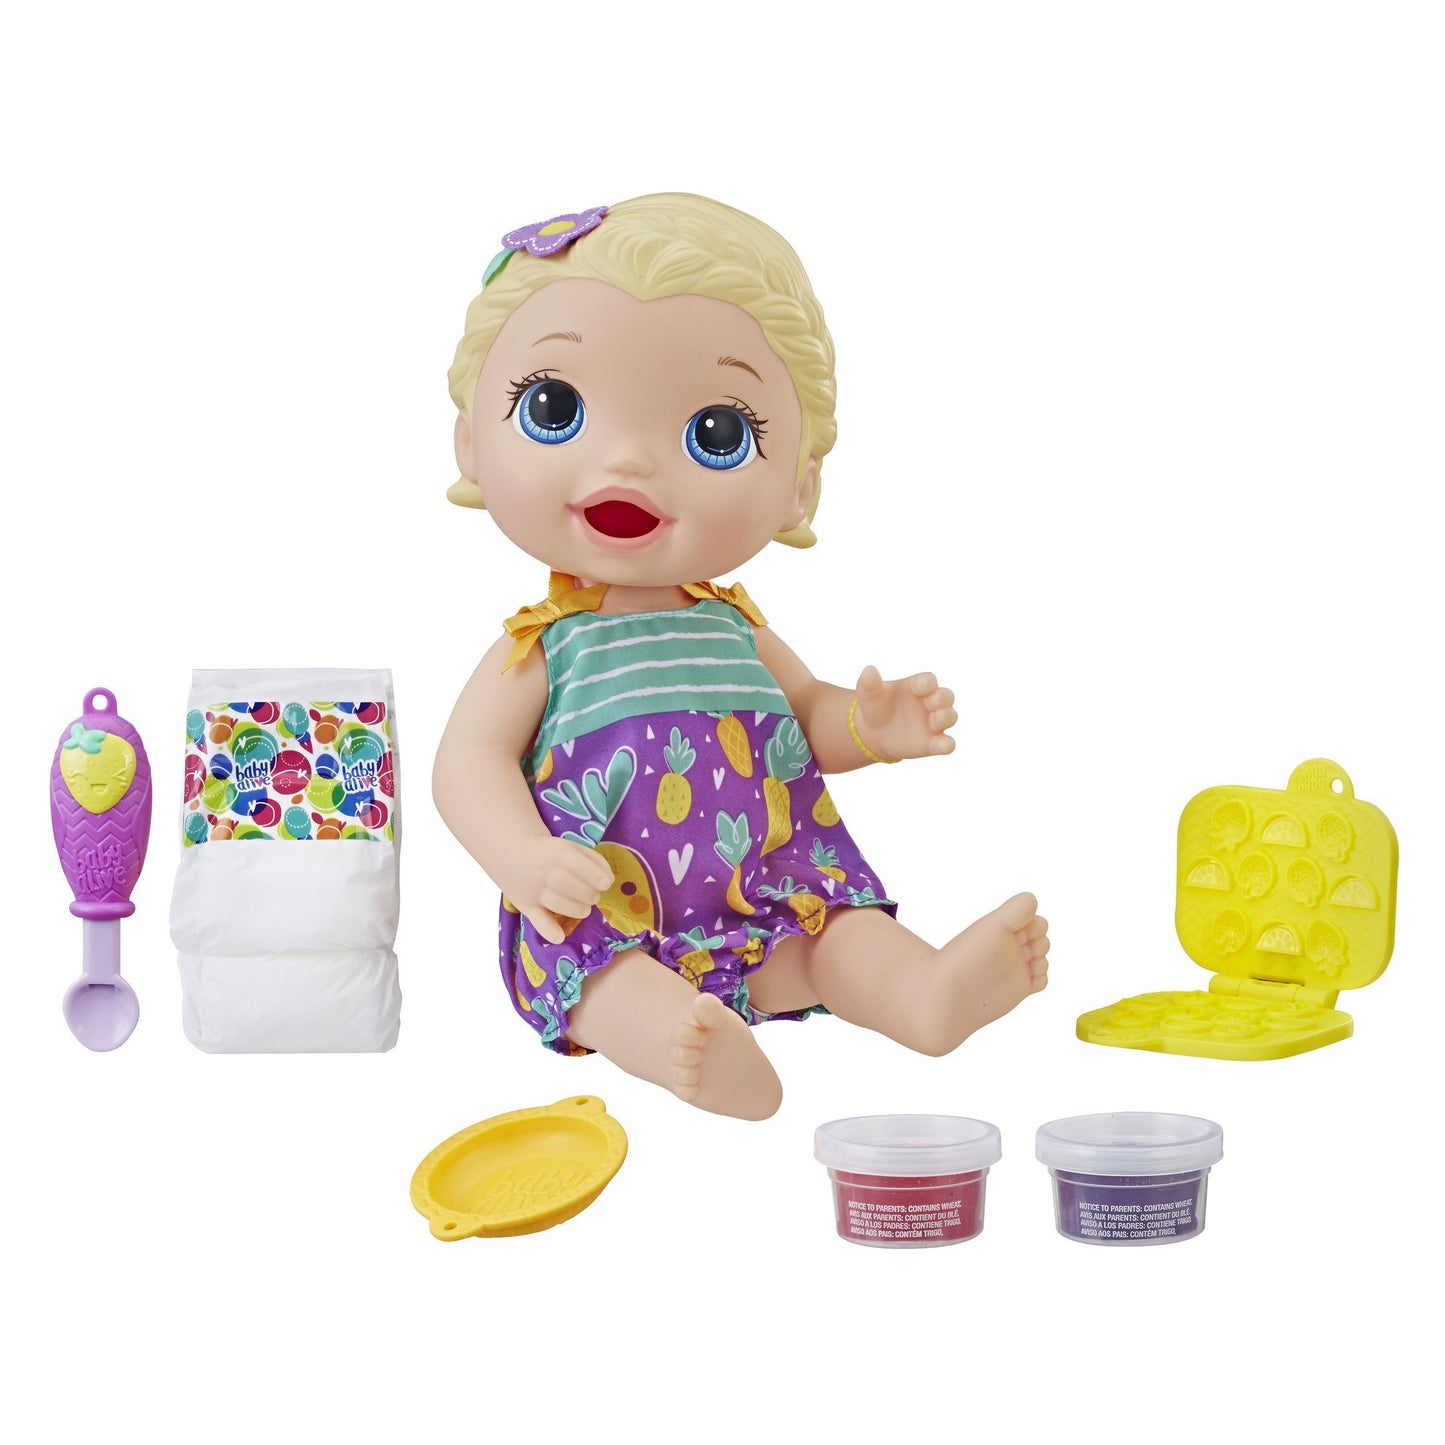 Baby Lily learns to eat solid foods BABY ALIVE E5841